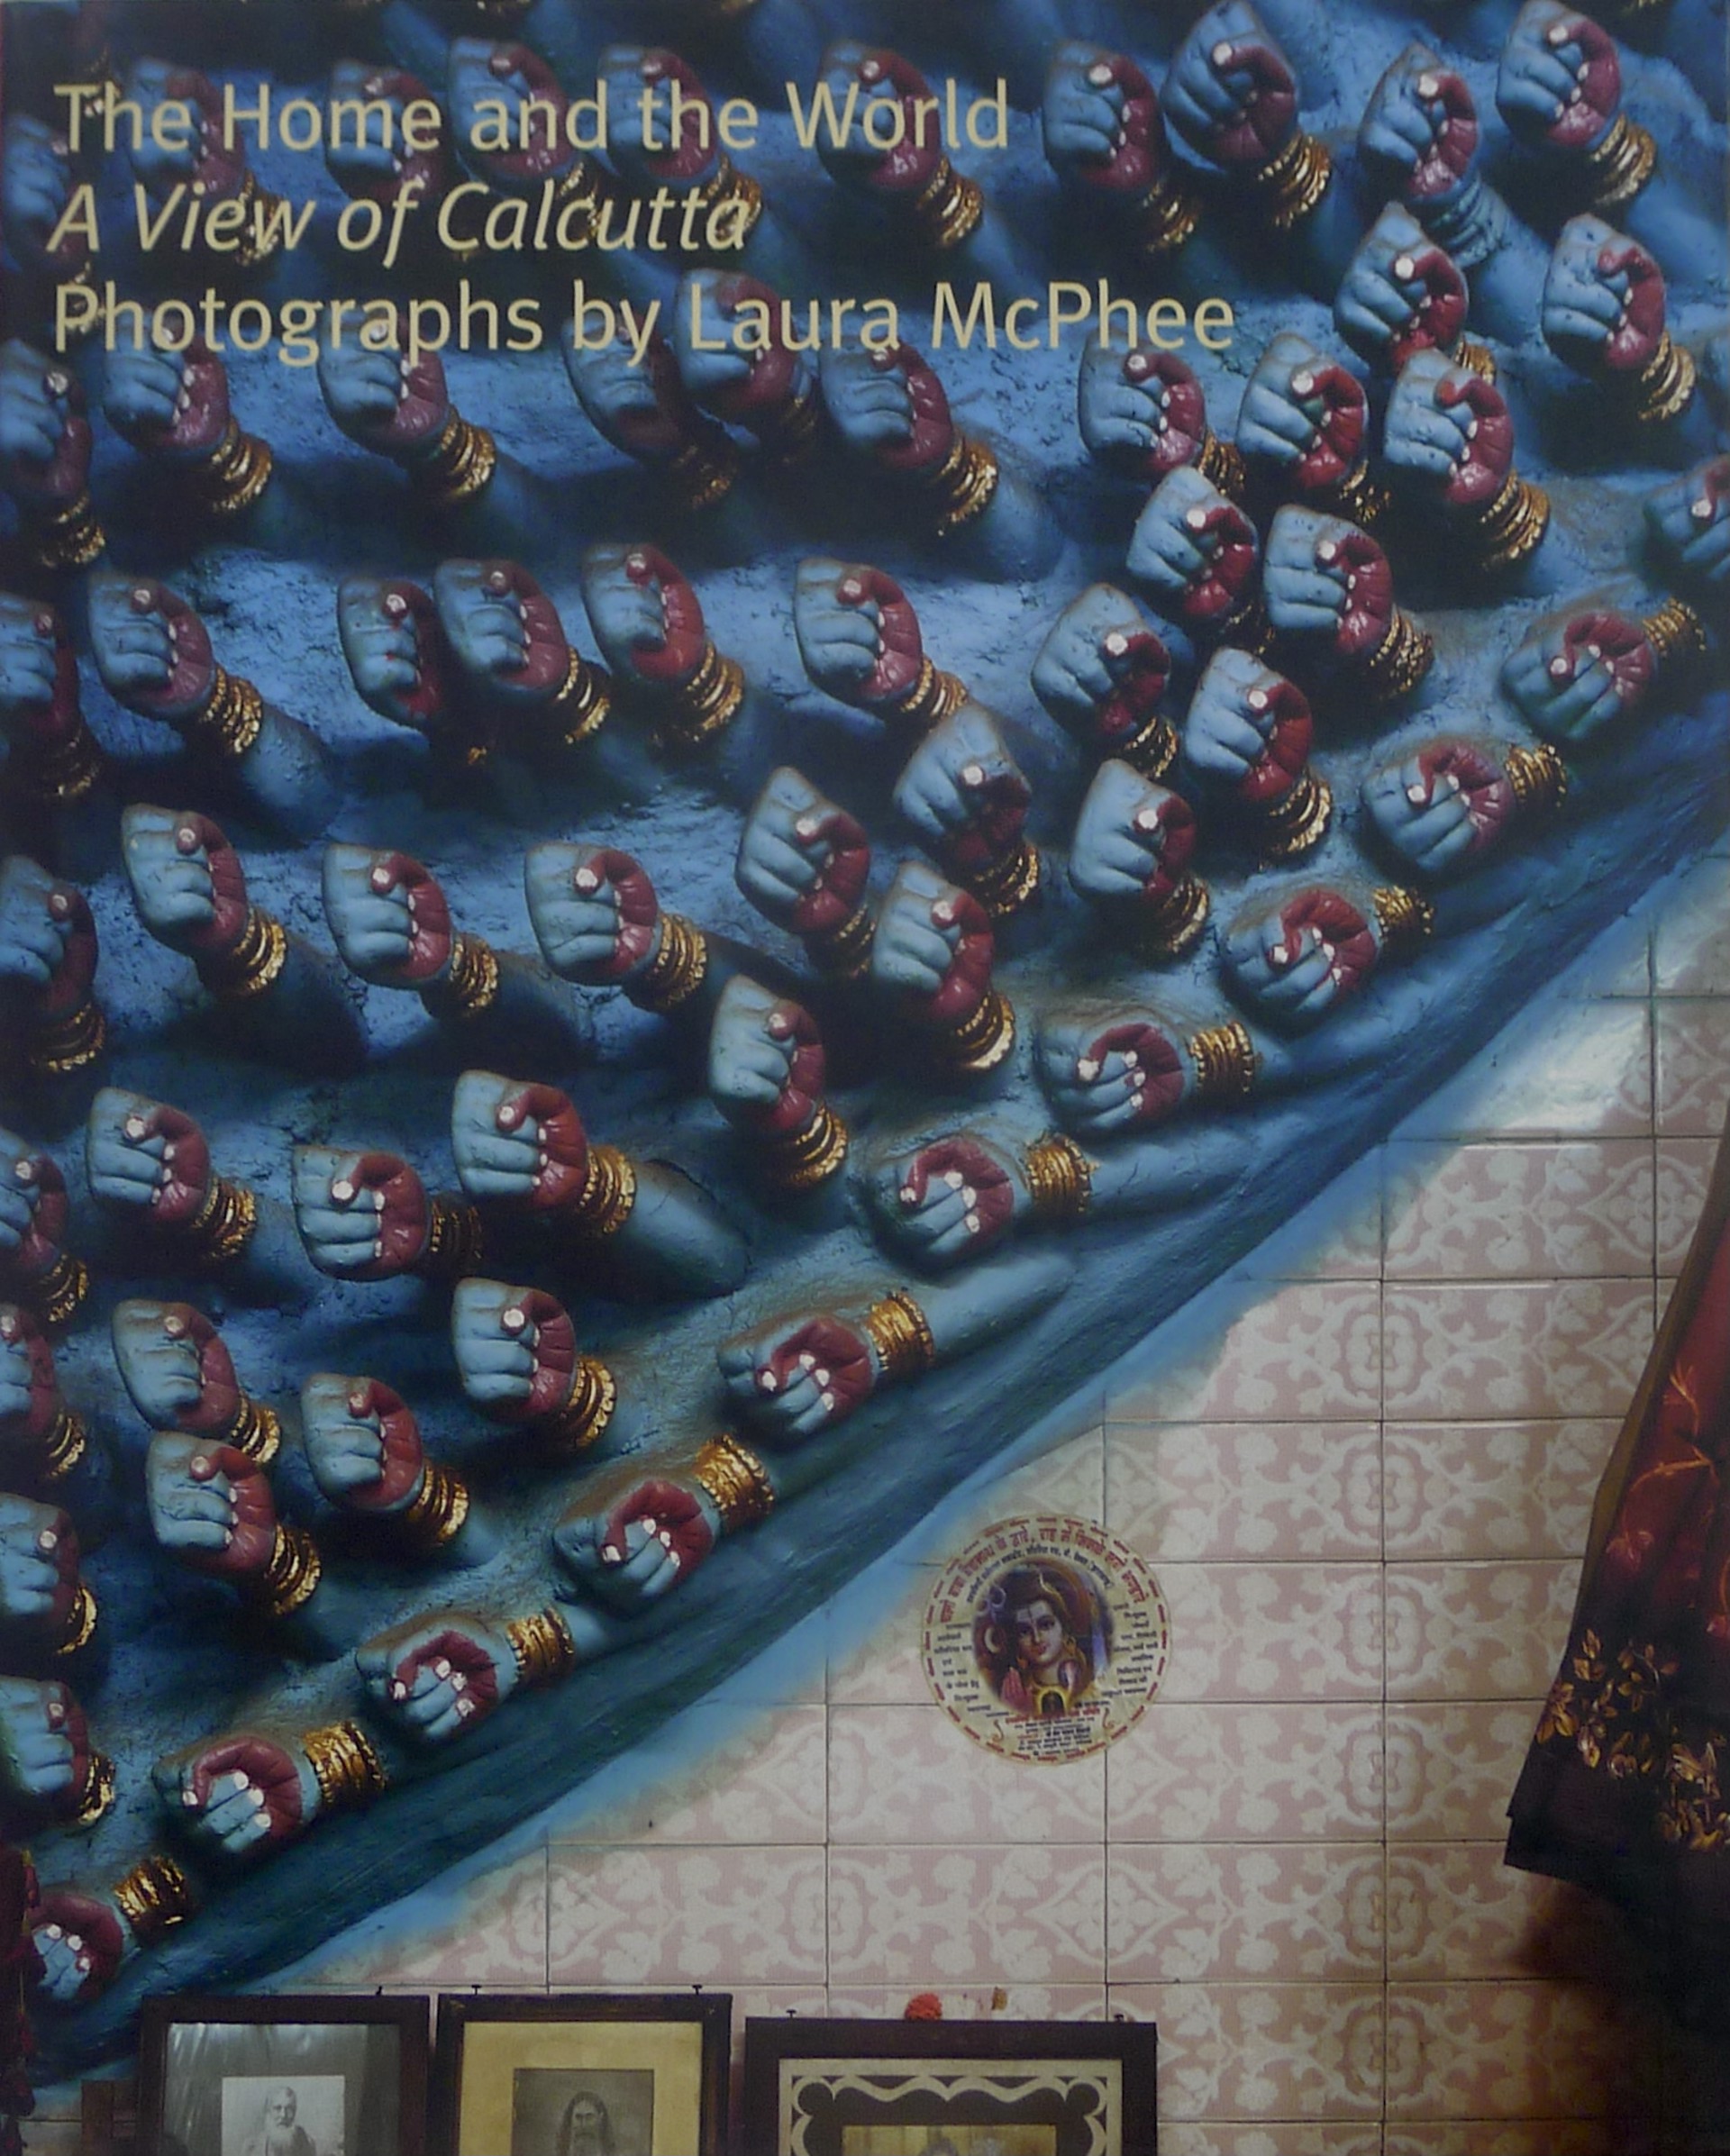 The Home and the World - A View of Calcutta by Laura McPhee